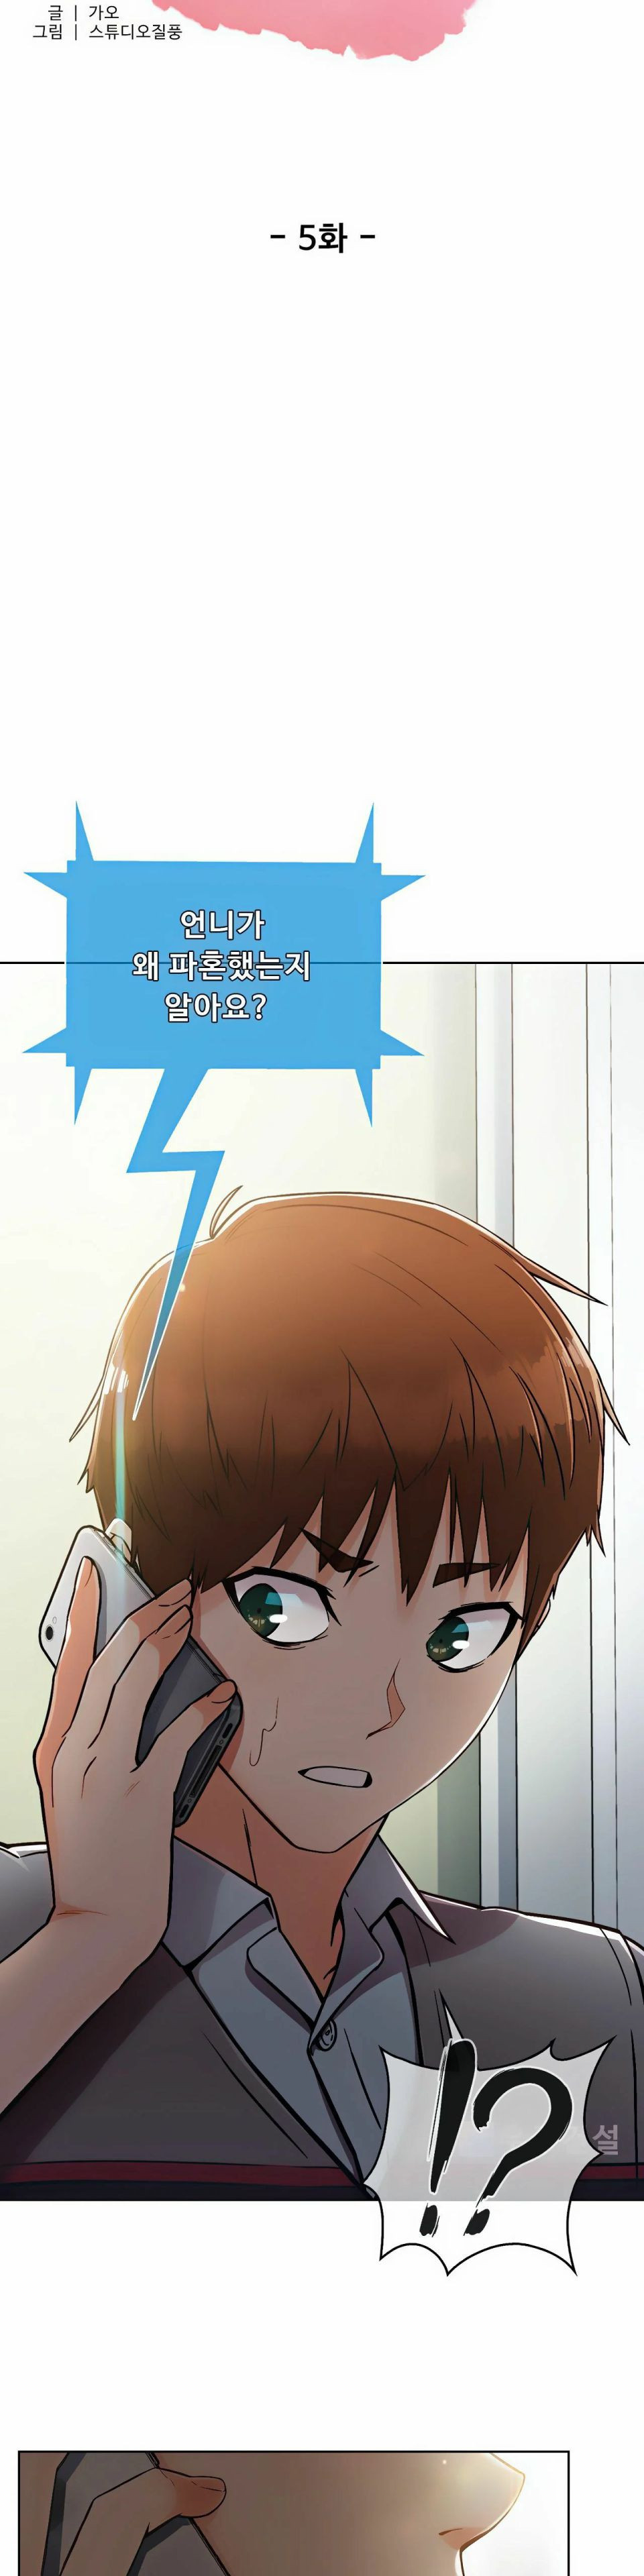 Sincere Minhyuk Raw - Chapter 5 Page 3